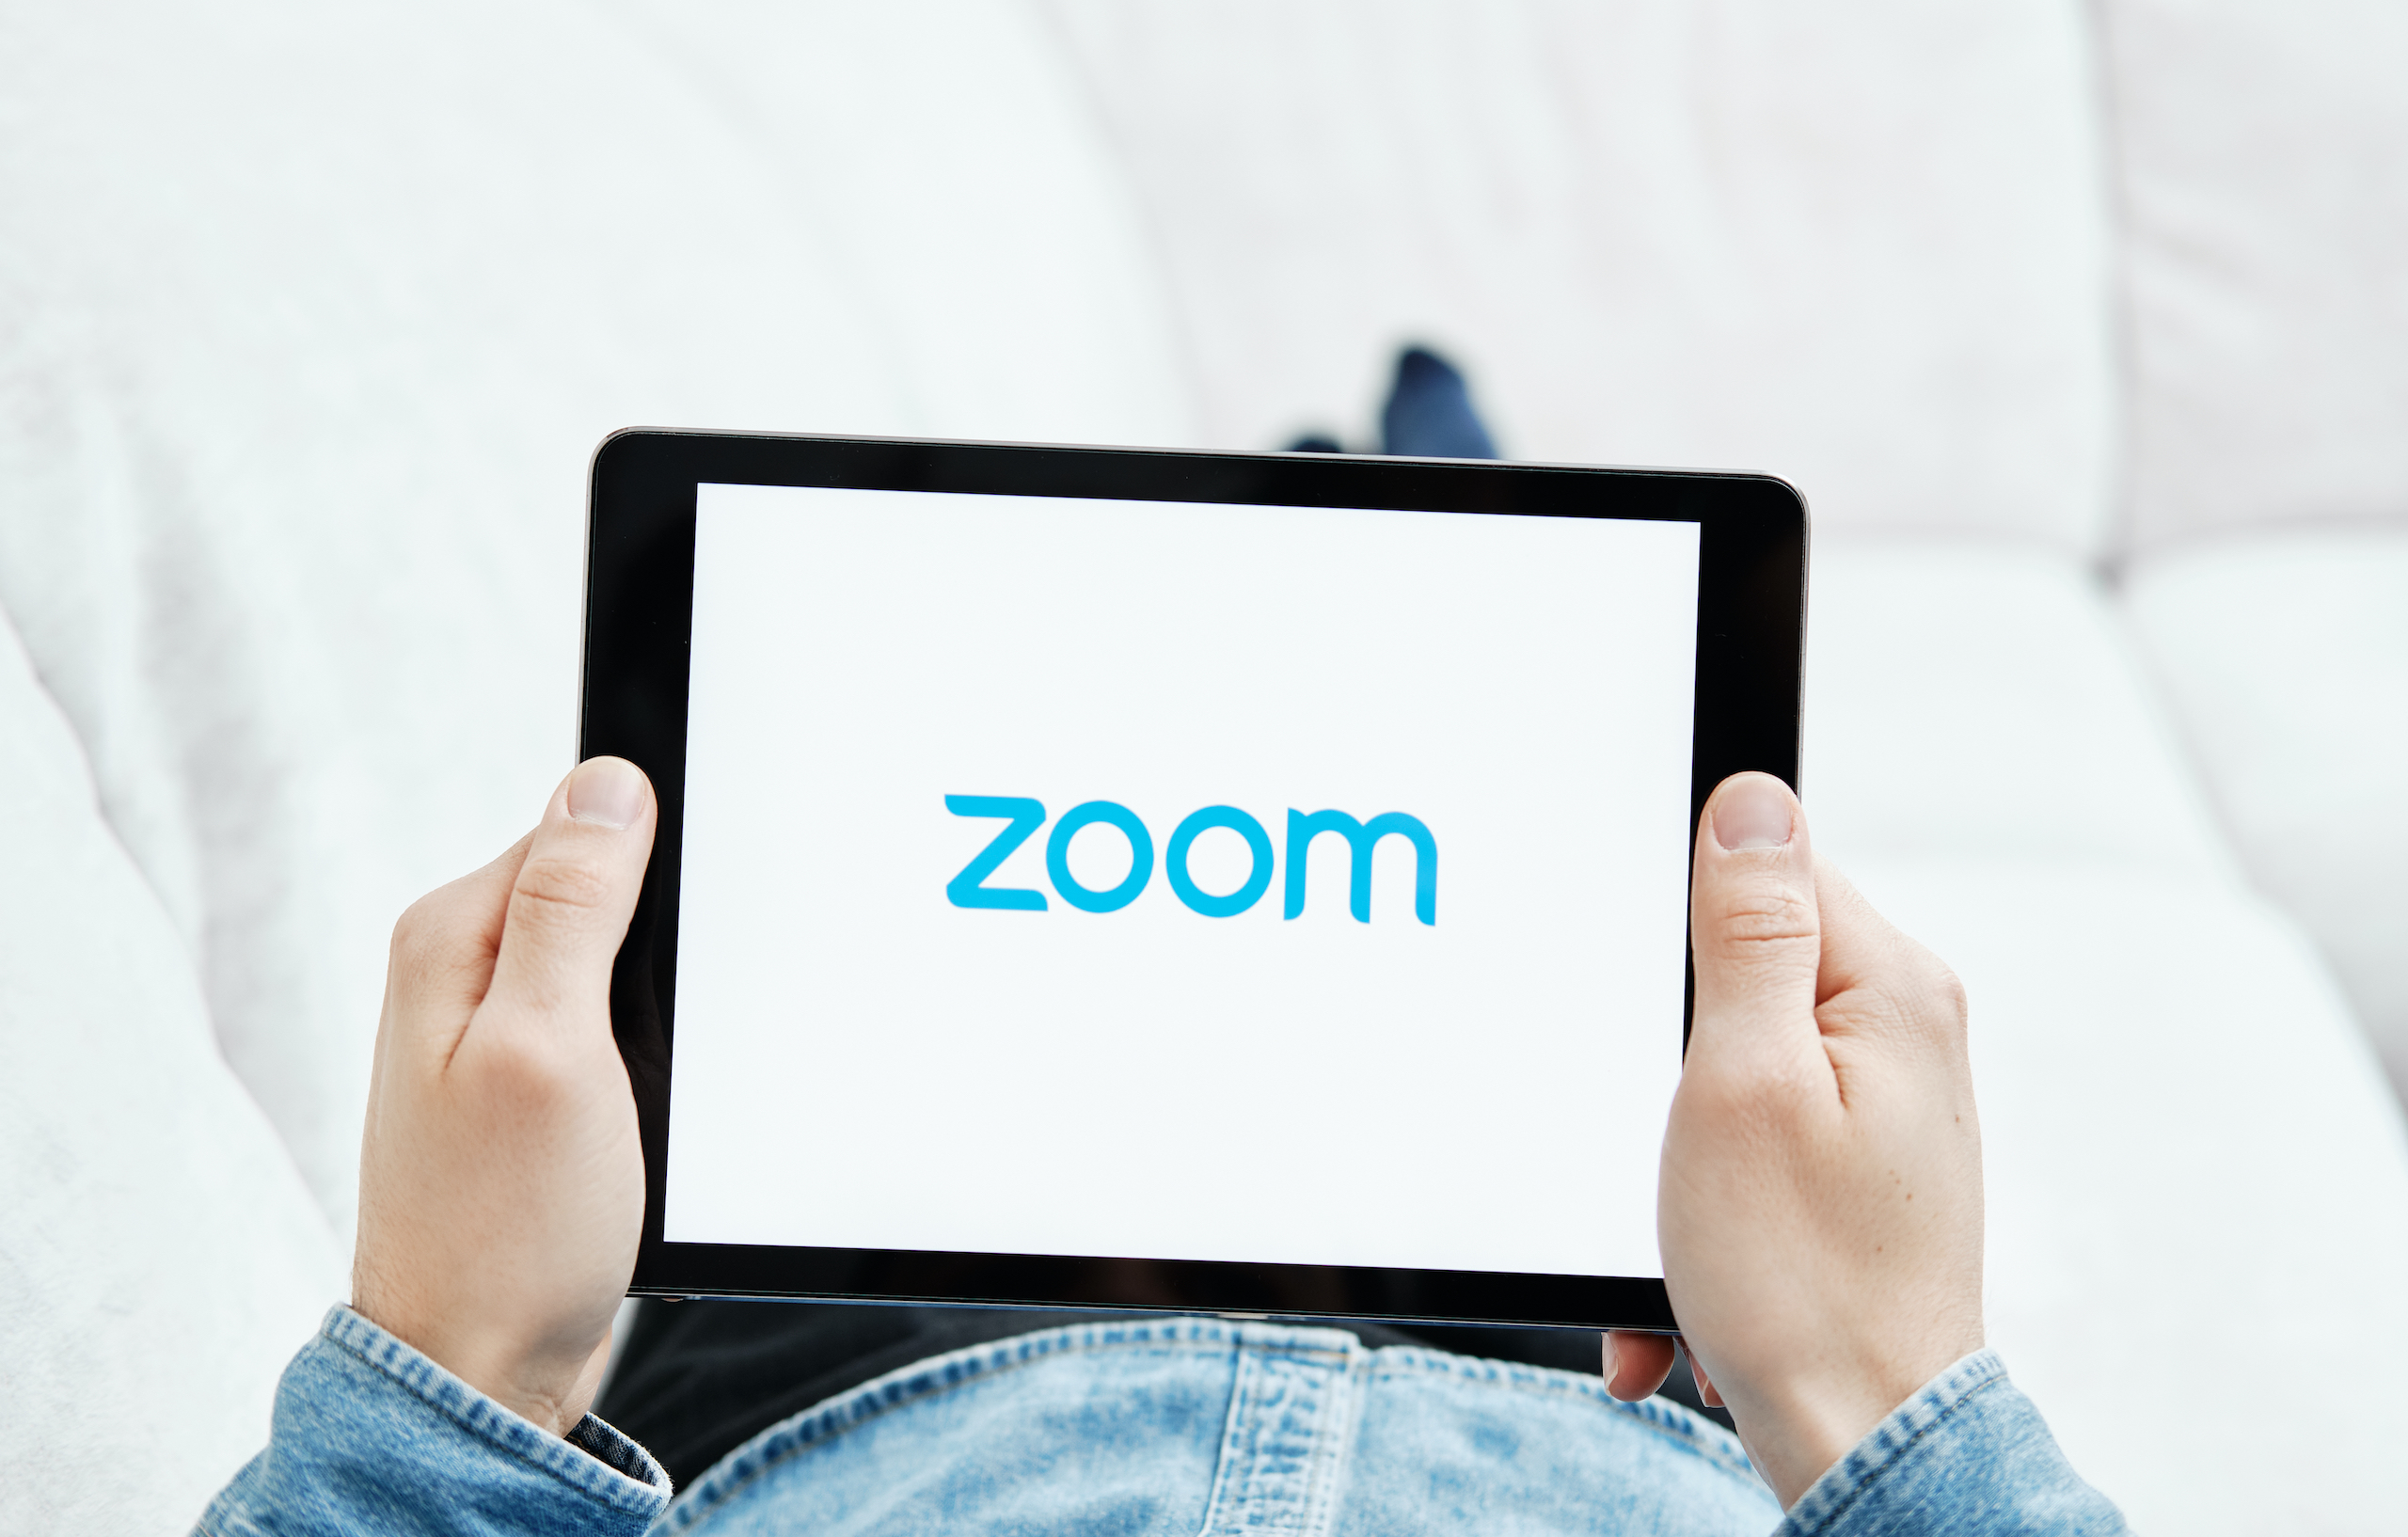 Zoom-Bombing is the Newest Online Threat. Learn How to Keep Video Meetings Private